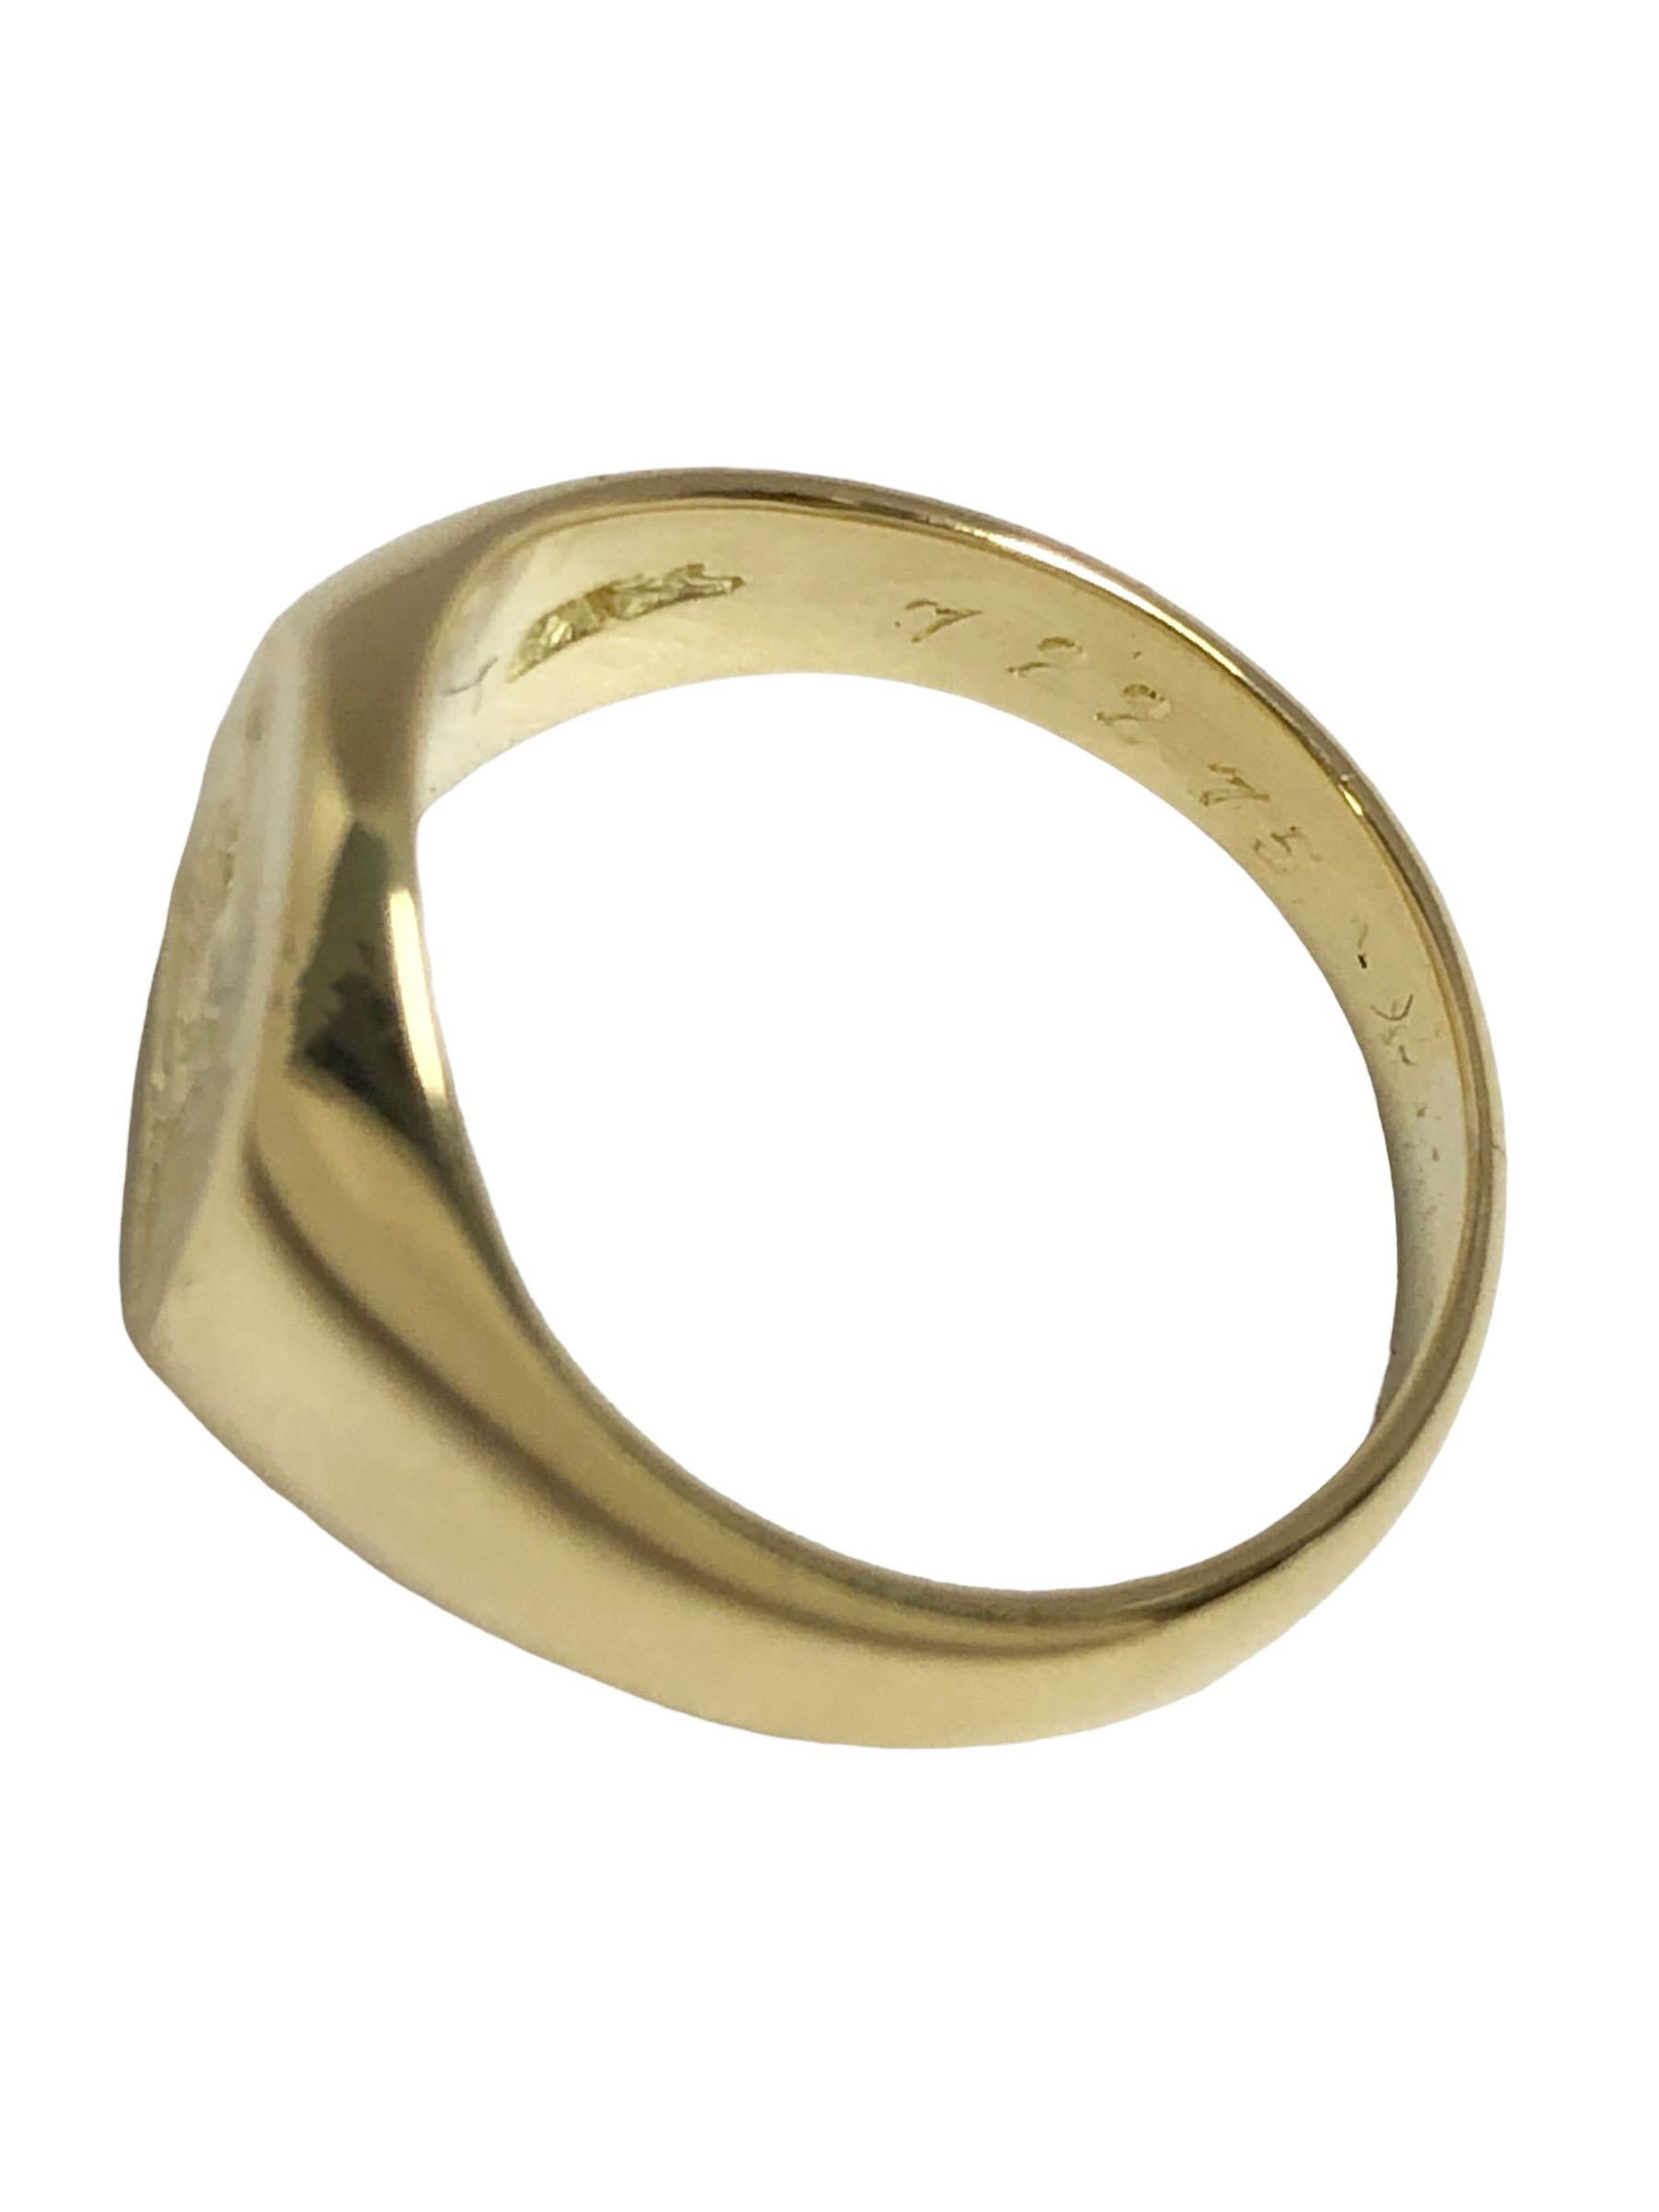 Cartier Vintage Yellow Gold Signet Ring 2